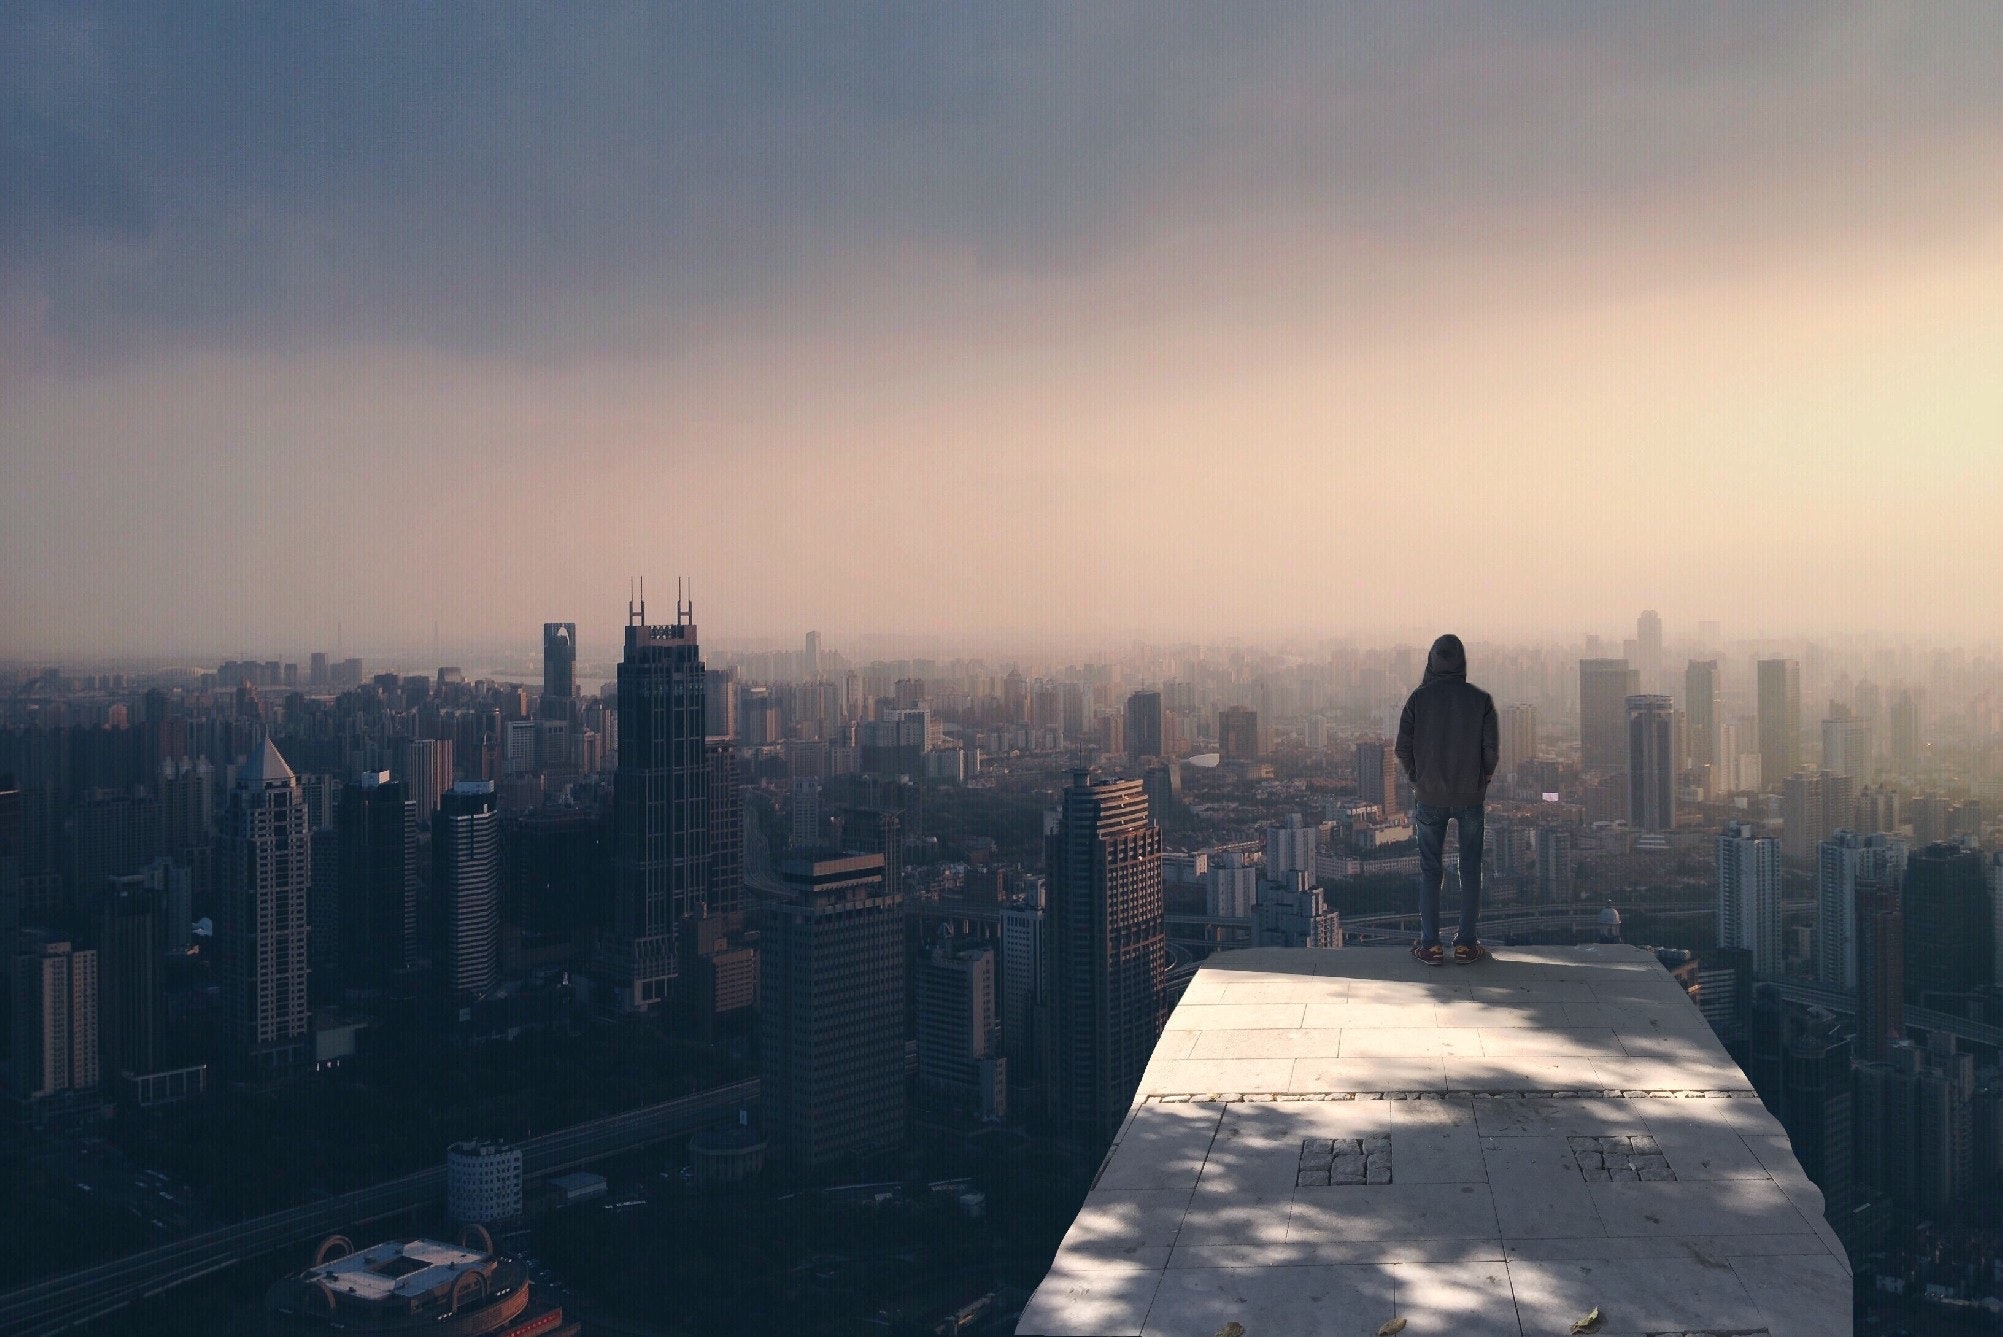 a boy standing on the highest building of the city. he is looking the whole city. he wear coat and jeans.